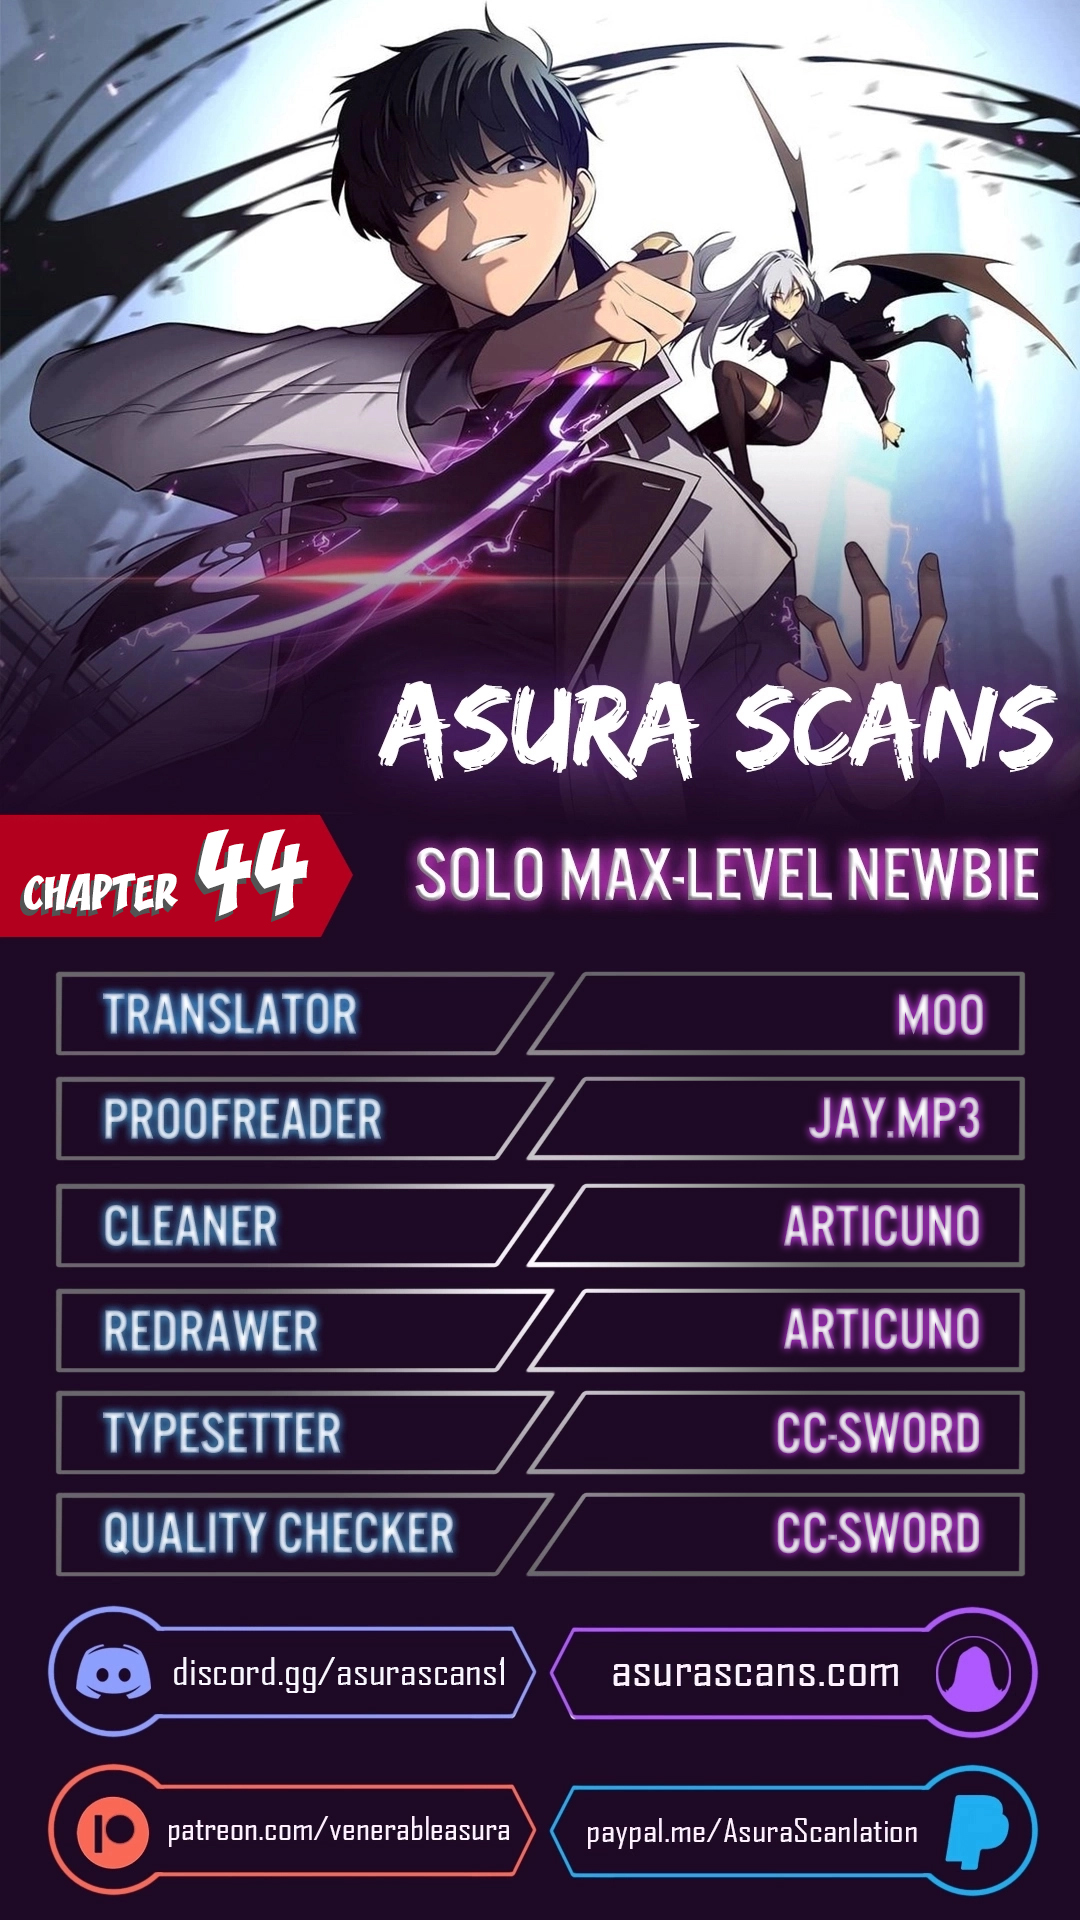 Solo Max-Level Newbie Chapter 44